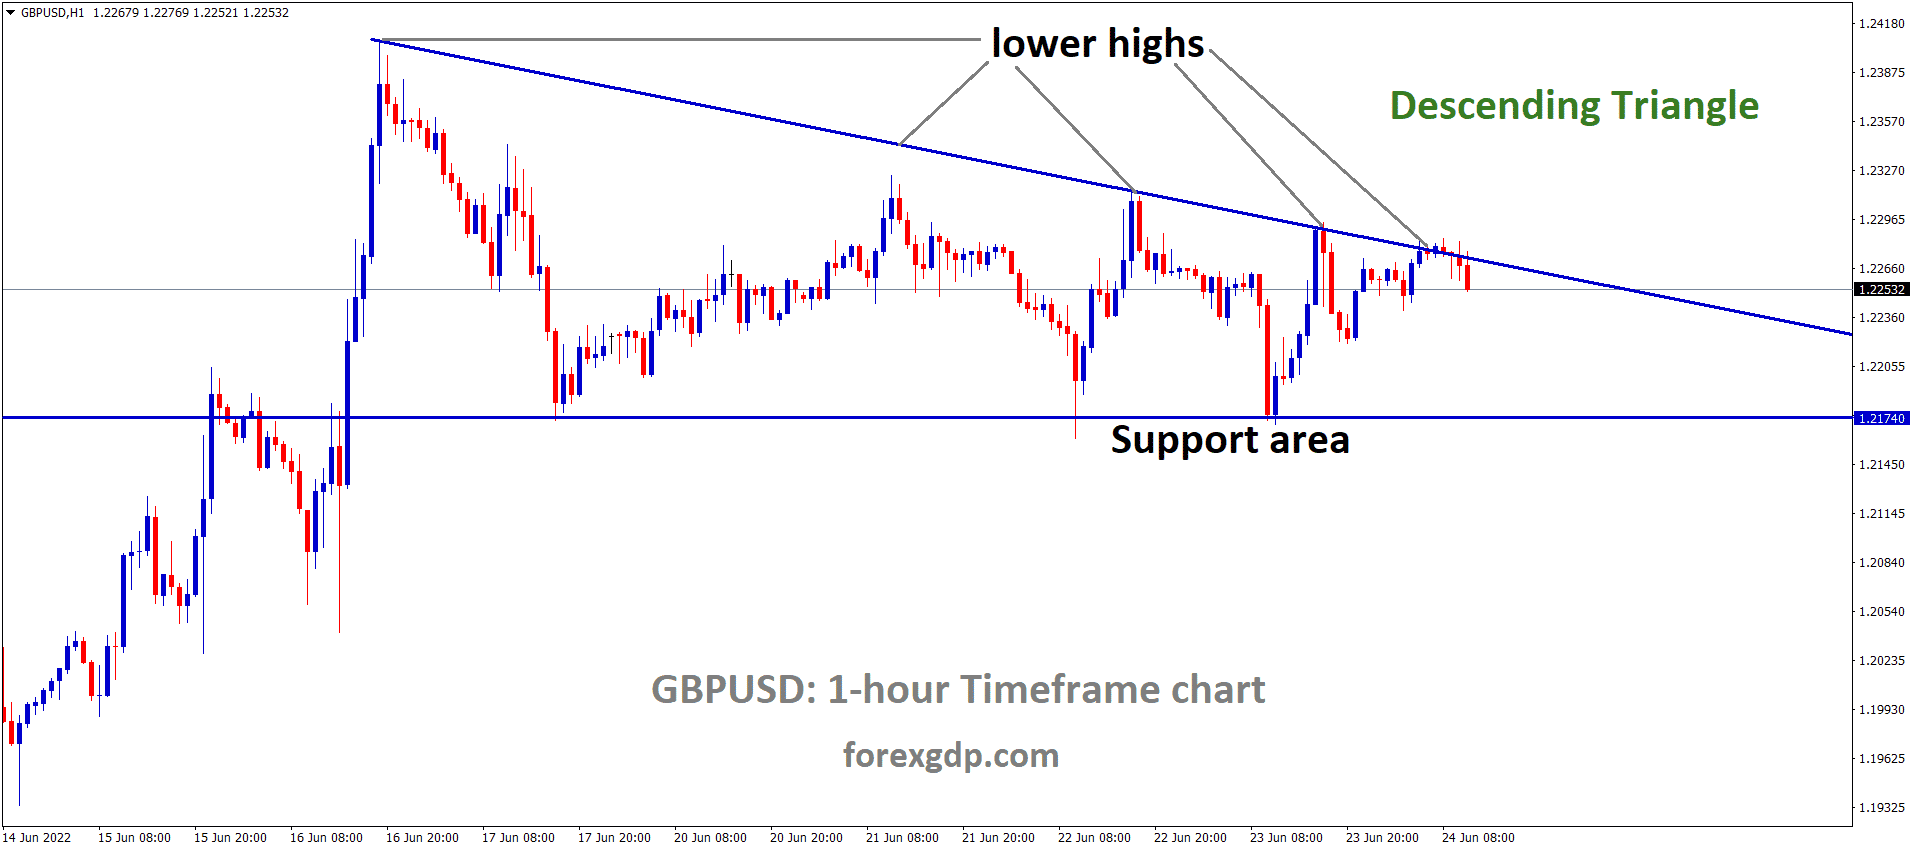 GBPUSD H1 Time Frame Analysis Market is moving in the Descending triangle pattern and the Market has Fallen from the Lower high area of the Pattern.